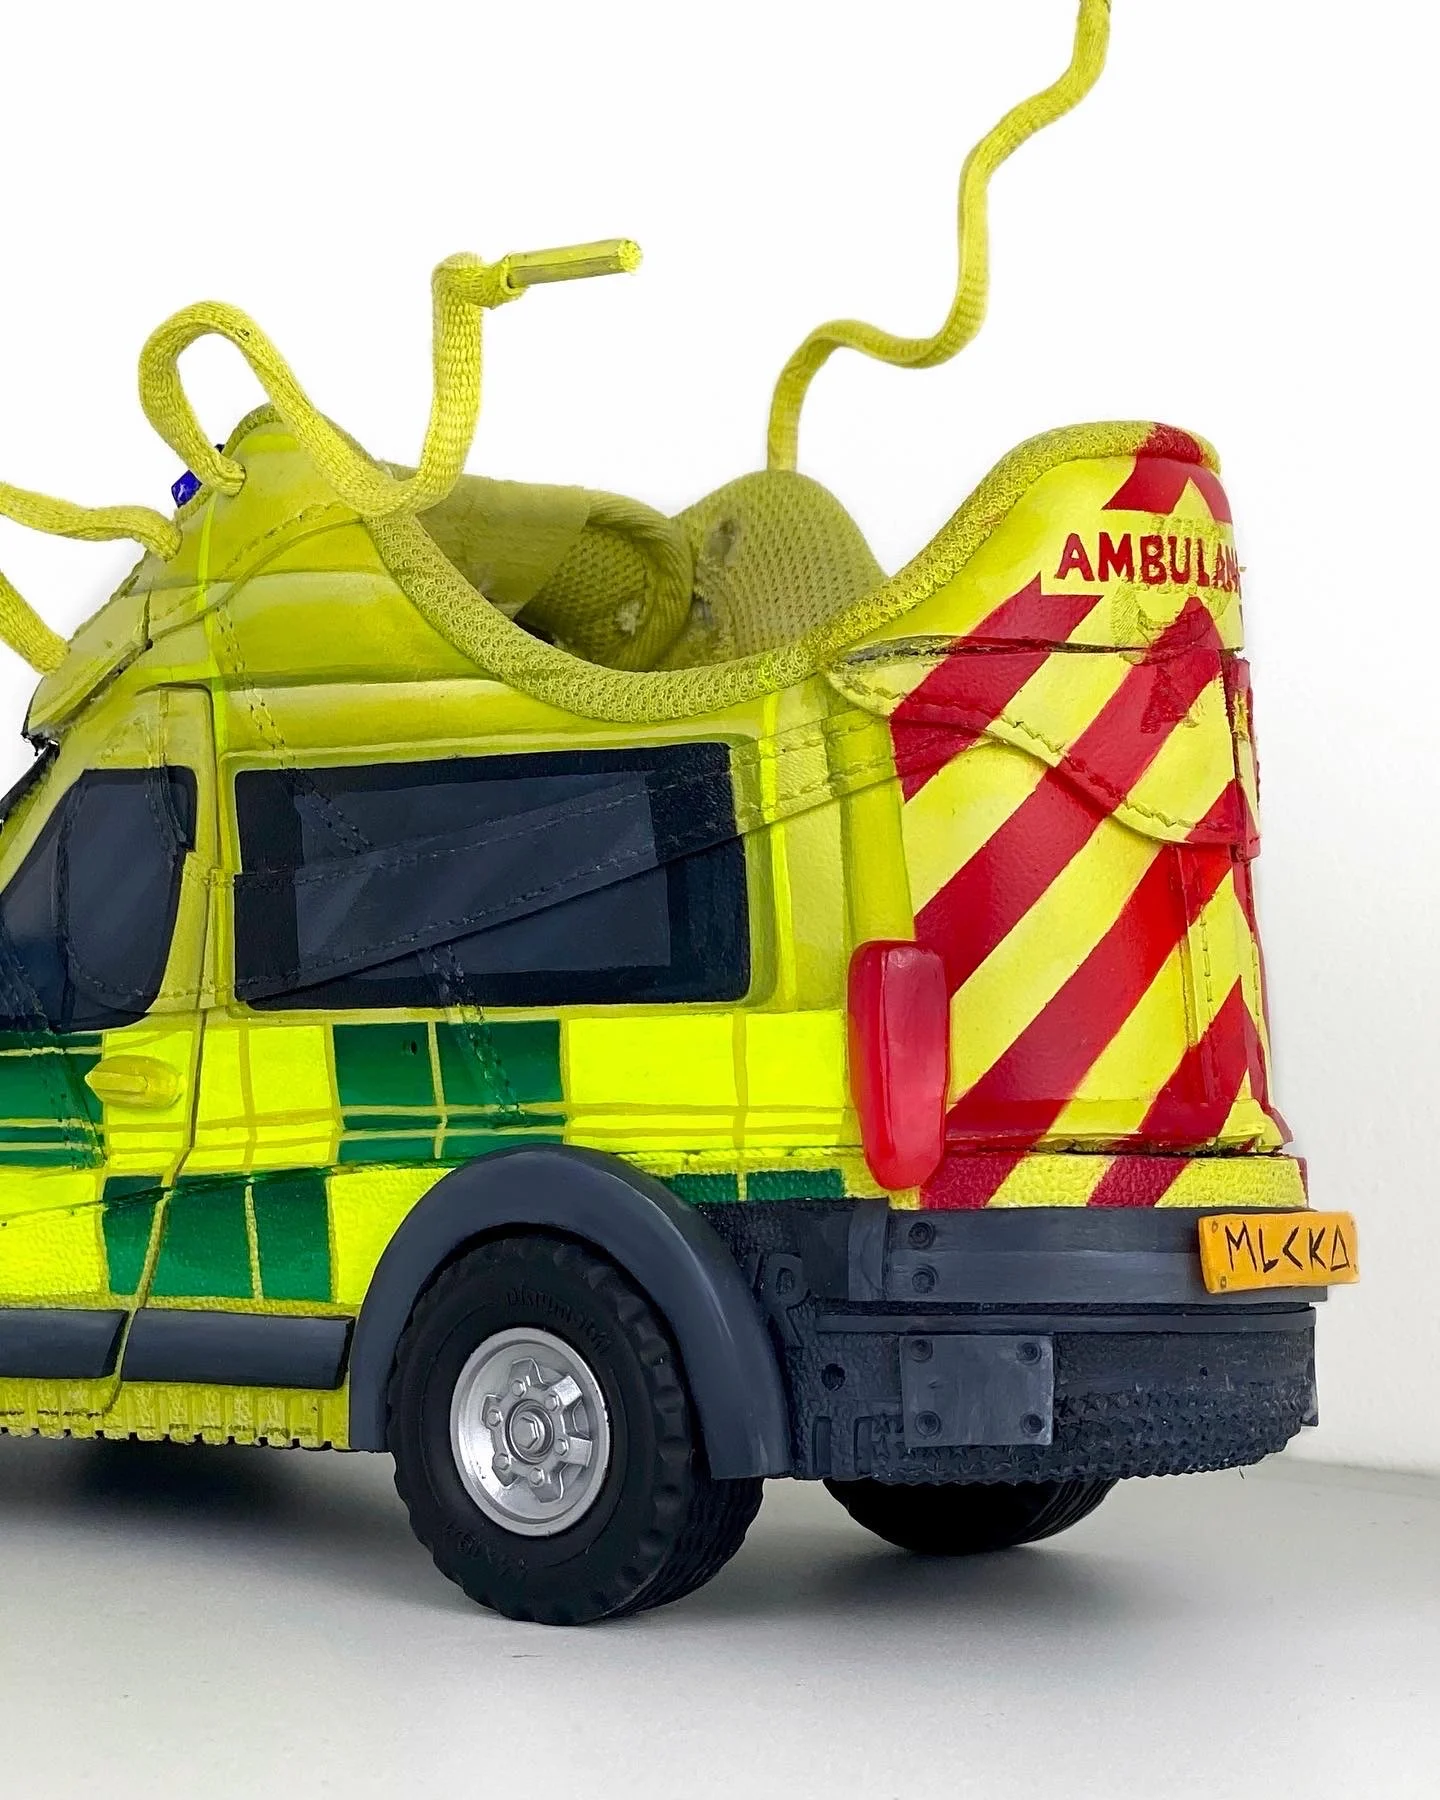 A photograph of a sculpture: a sneaker that has been turned into an British ambulance, including wheels, side mirrors, number plate, lights and bumpers. 
